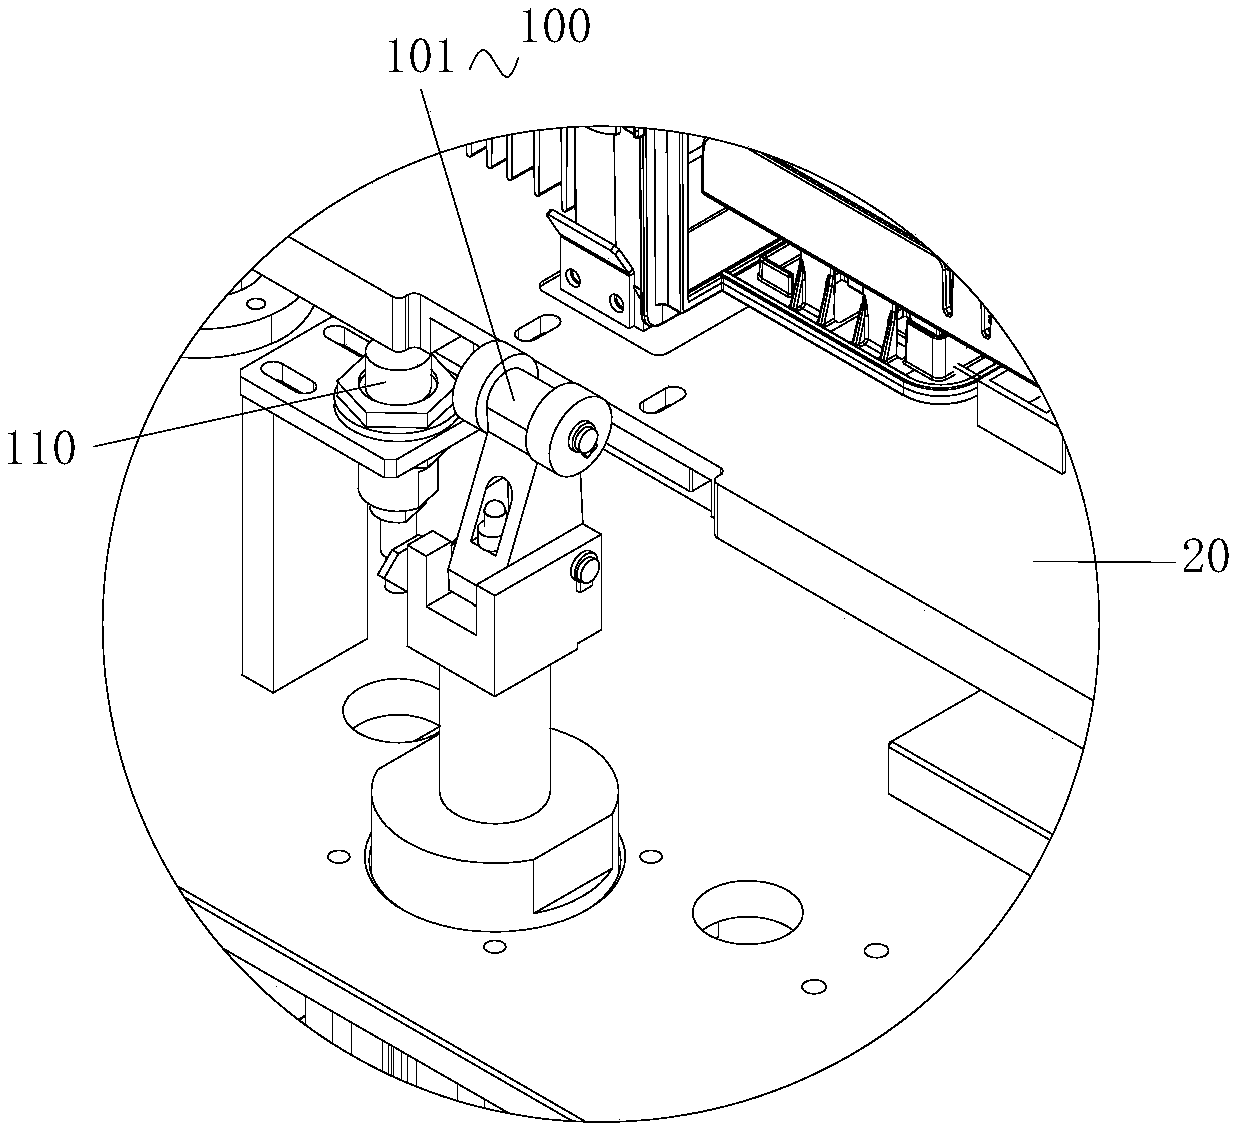 Thermal grease coating device